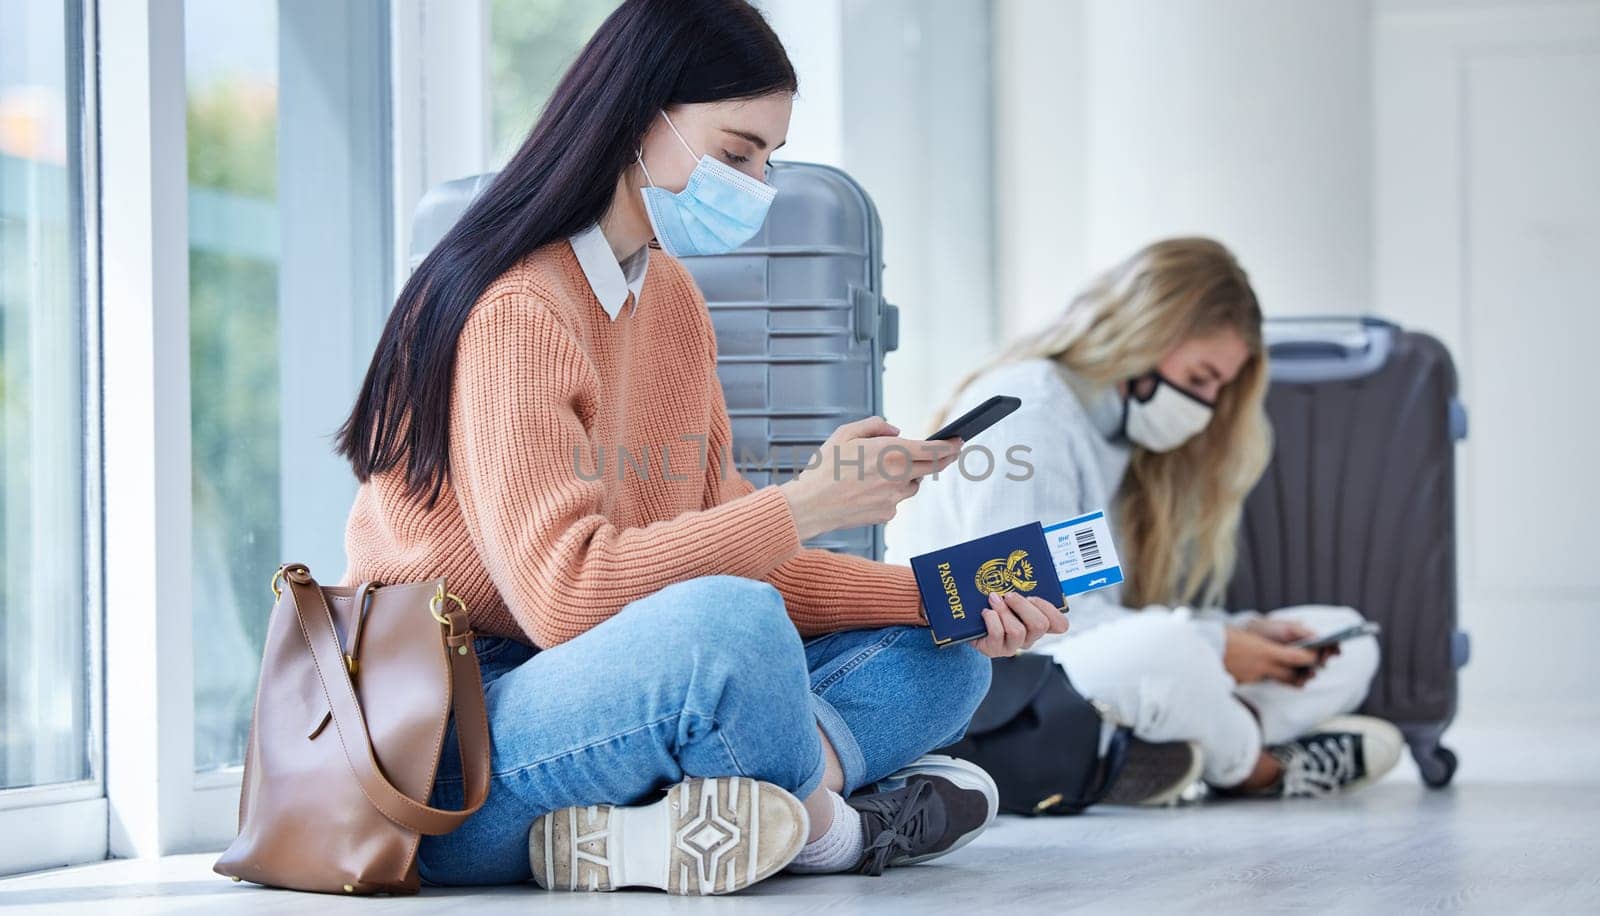 Passport, covid and mask, travel with smartphone for communication after canceled flight. Woman, compliance of health and safety rules, vaccination and traveling restriction during pandemic. by YuriArcurs